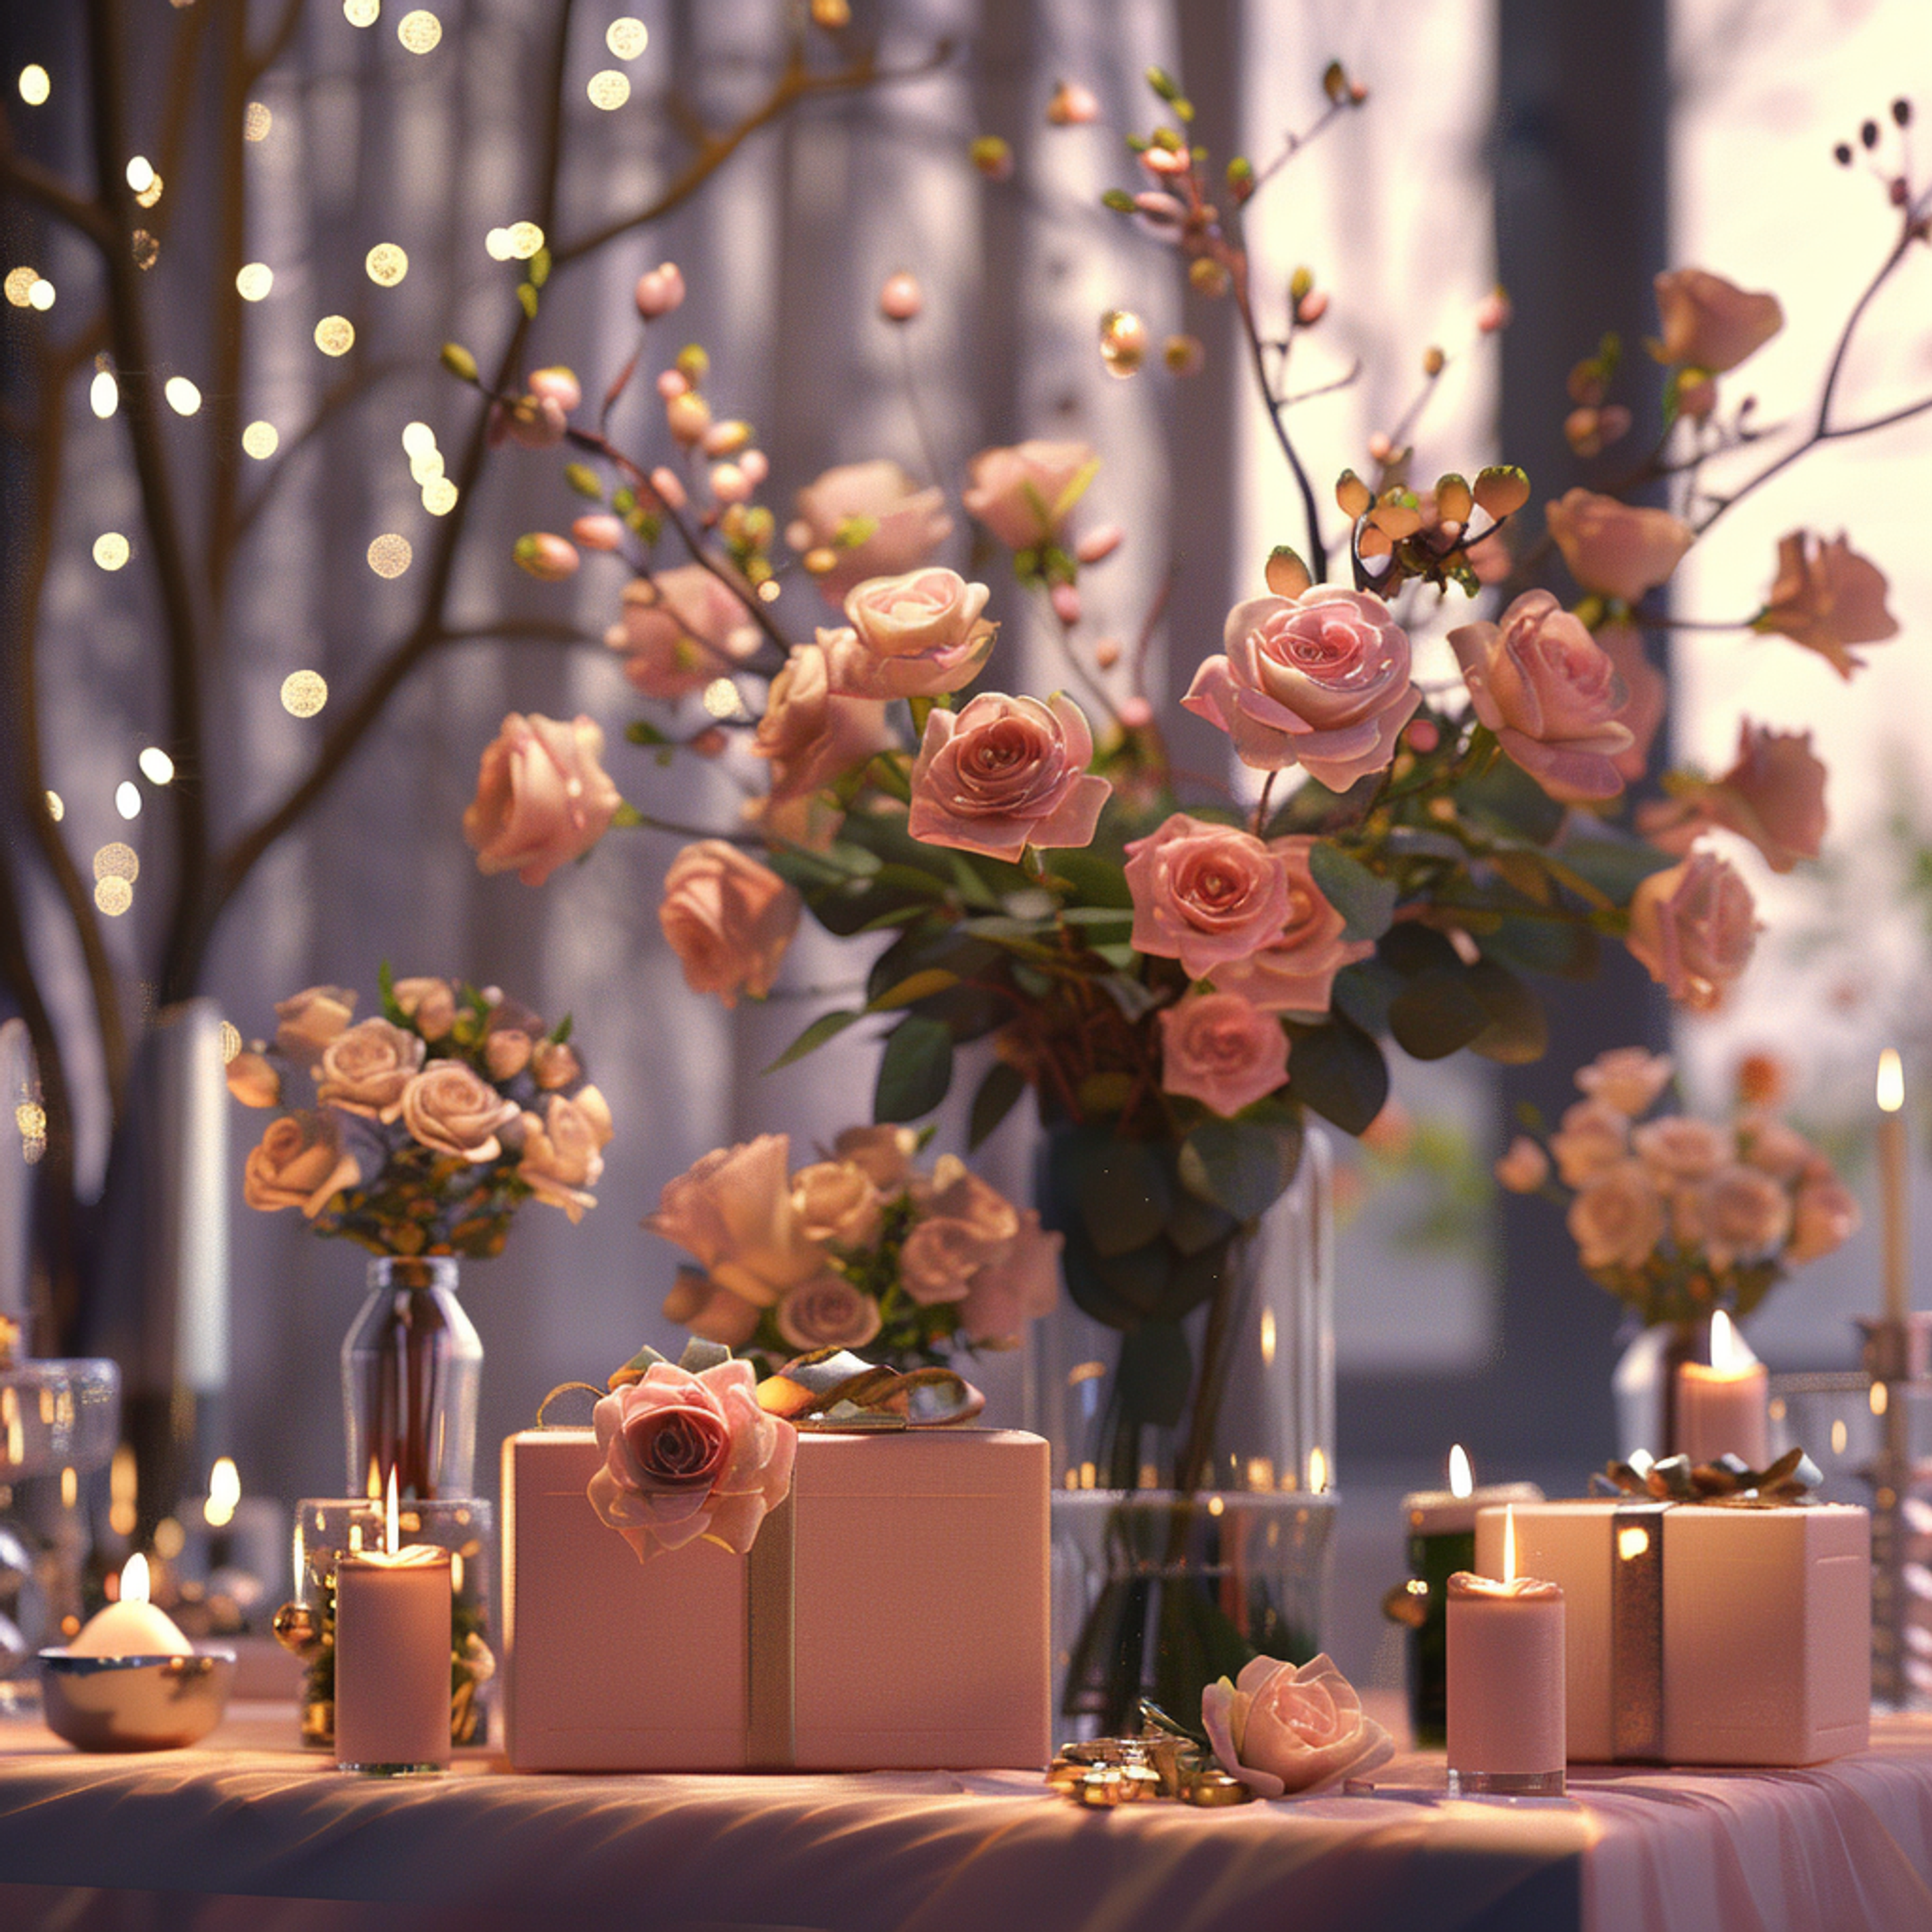 Gift table with candles, pink presents as gift boxes, and arranged roses in a vase.